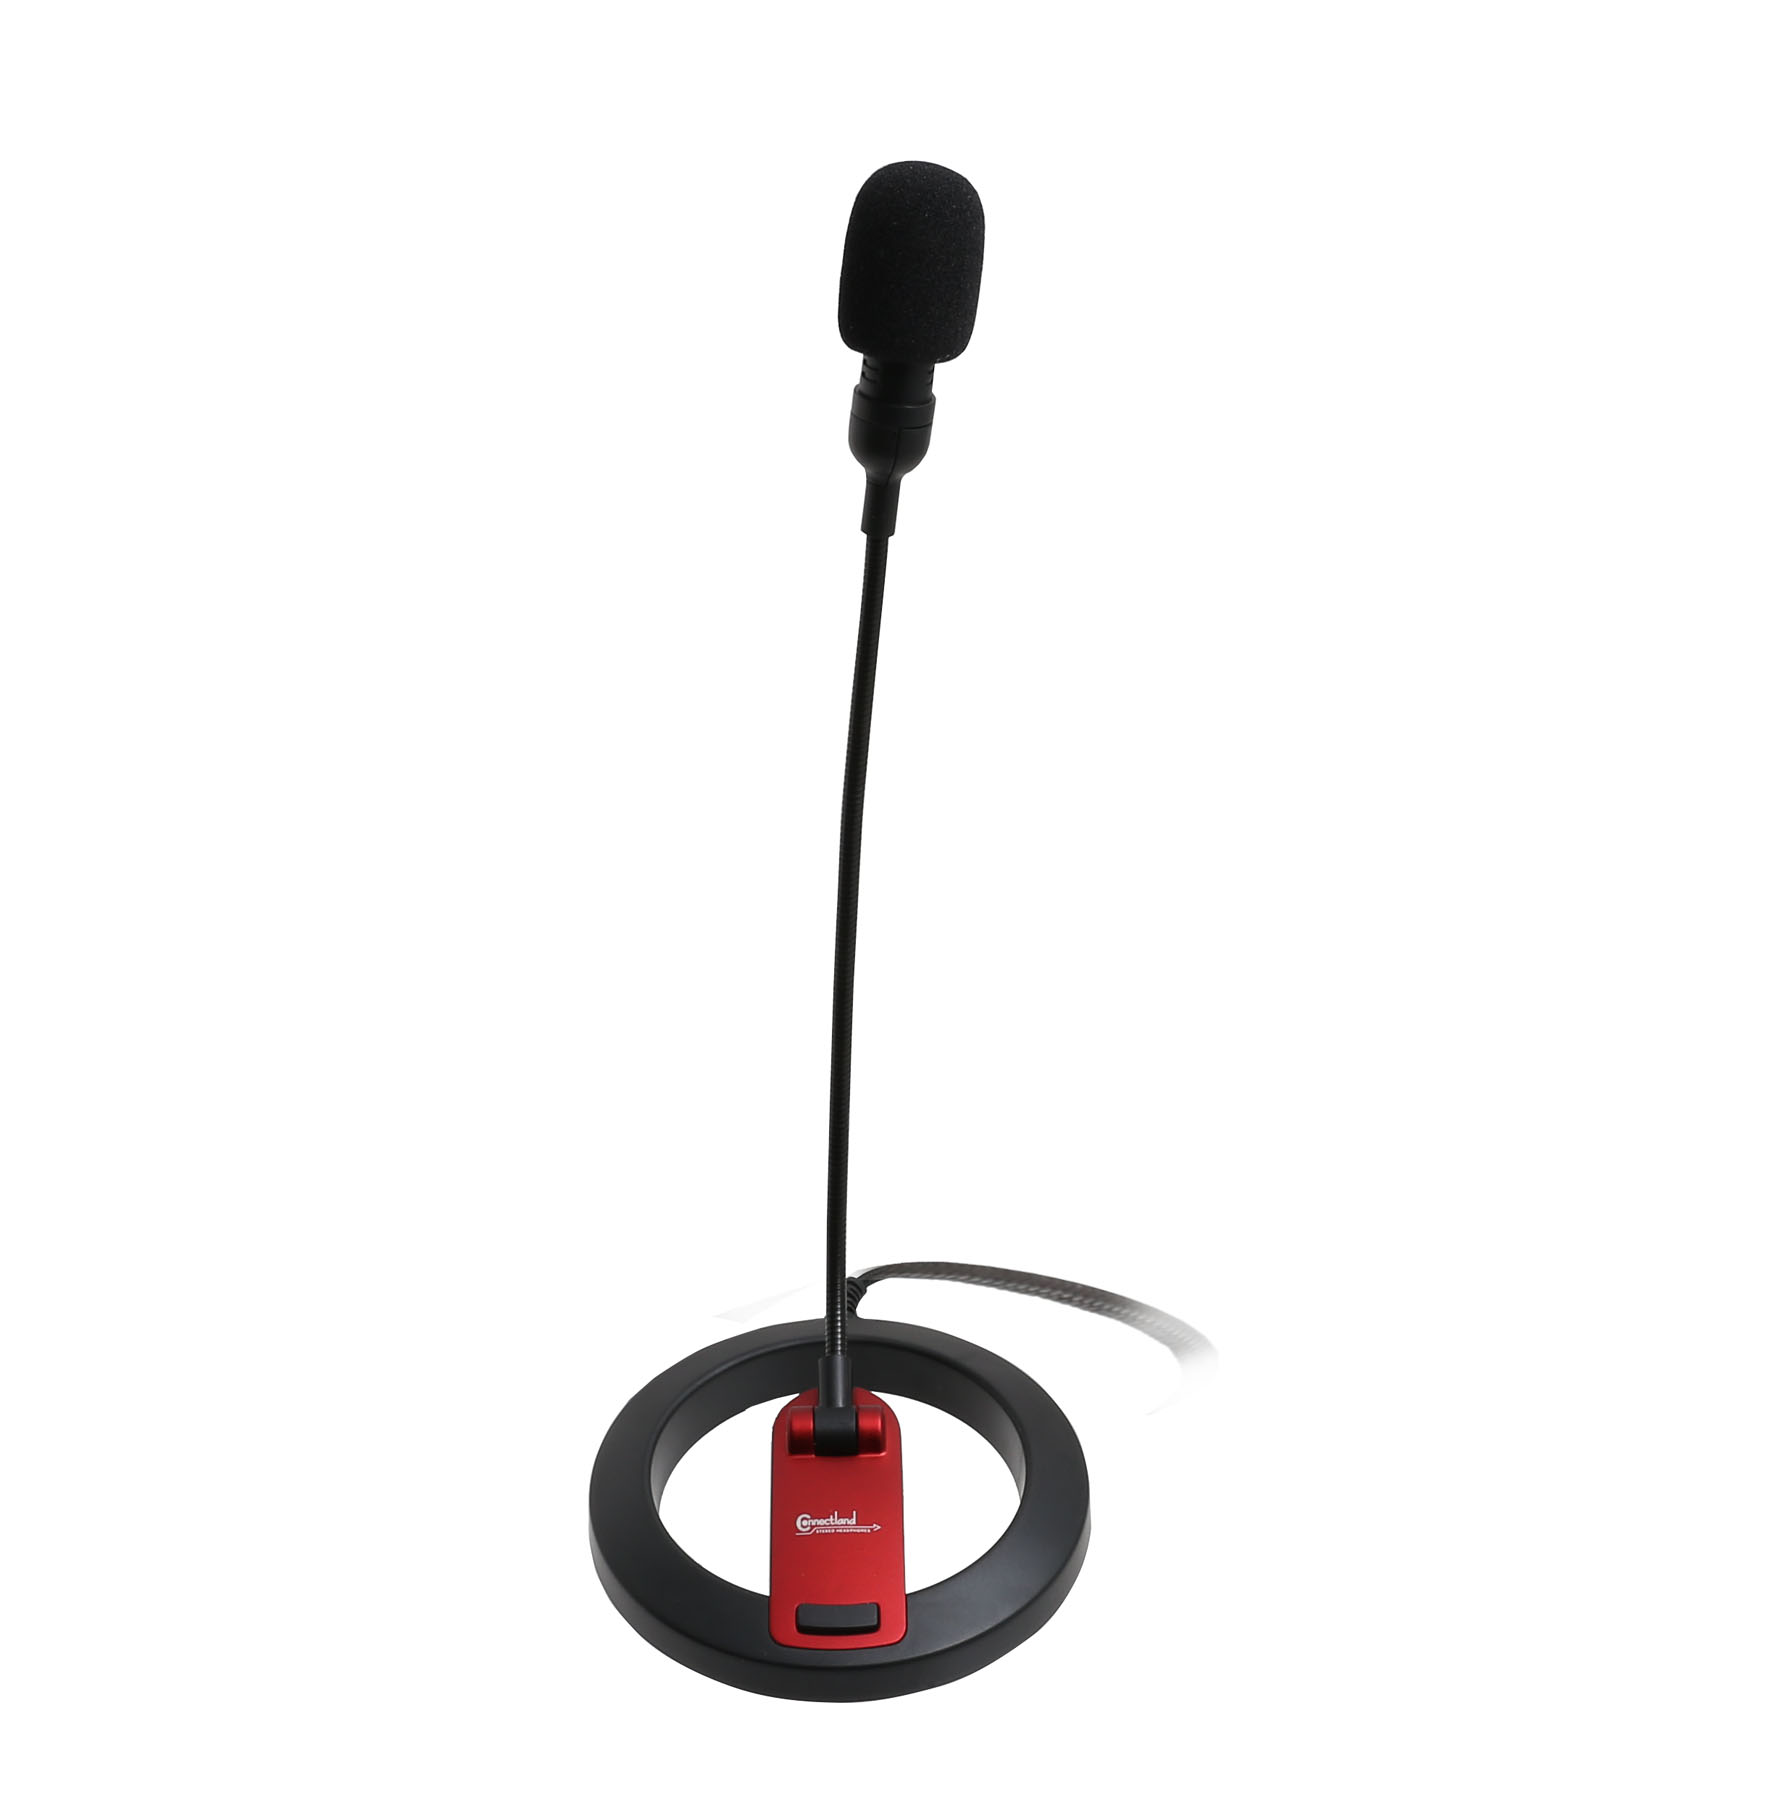 SYBA Multimedia Connectland CL-ME-606 Wired Microphone - image 2 of 4